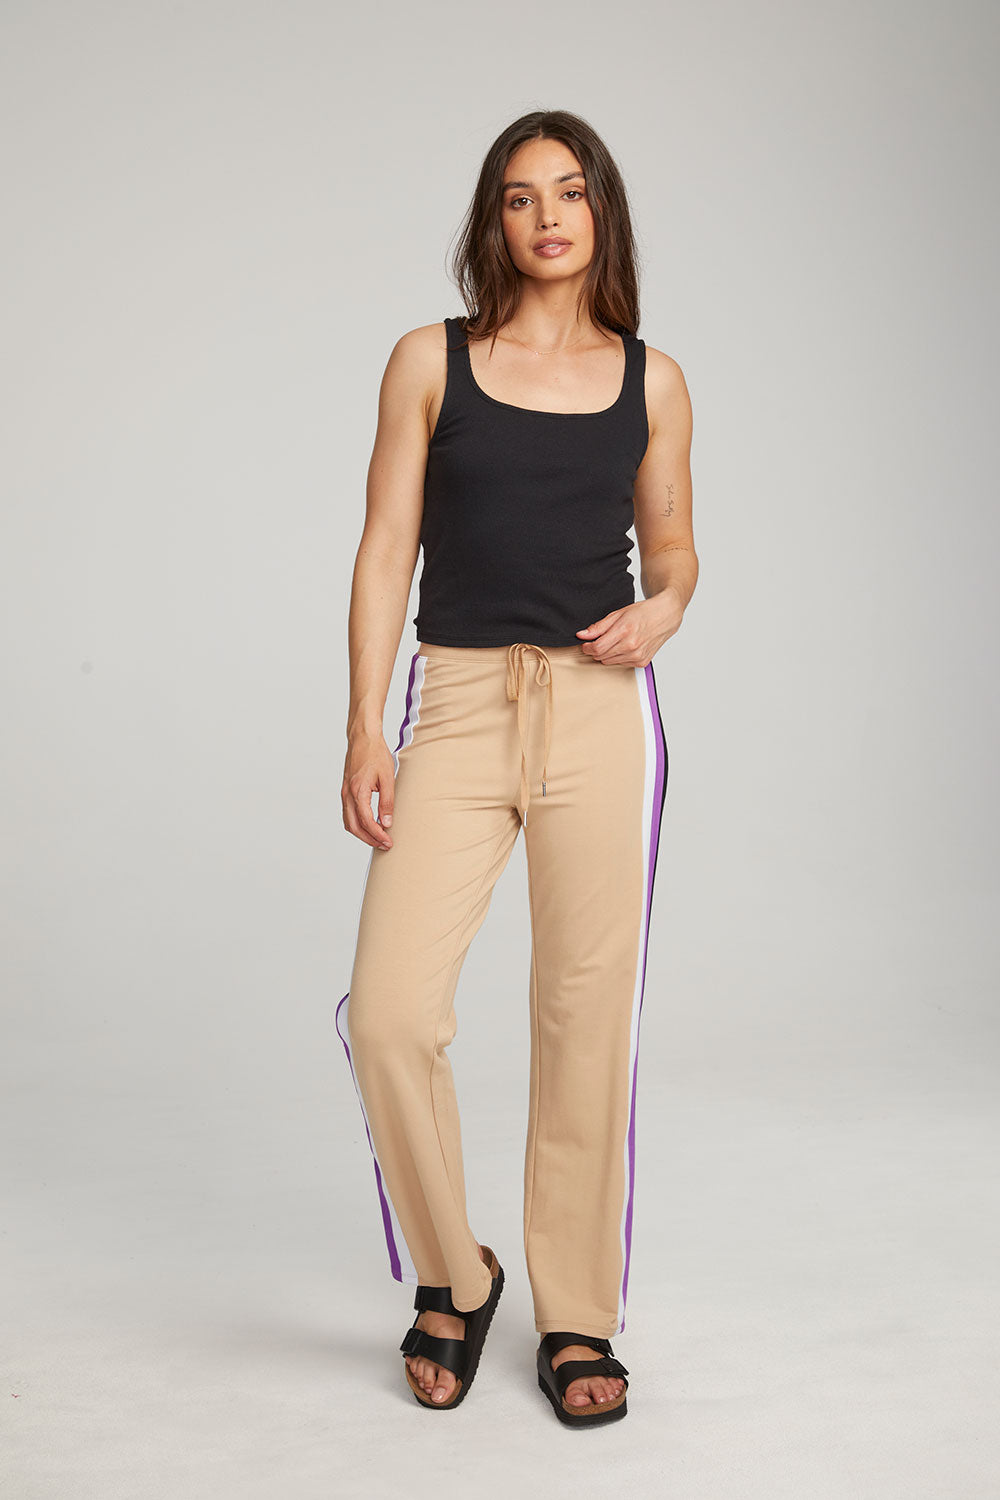 Adore Portabella Joggers WOMENS chaserbrand